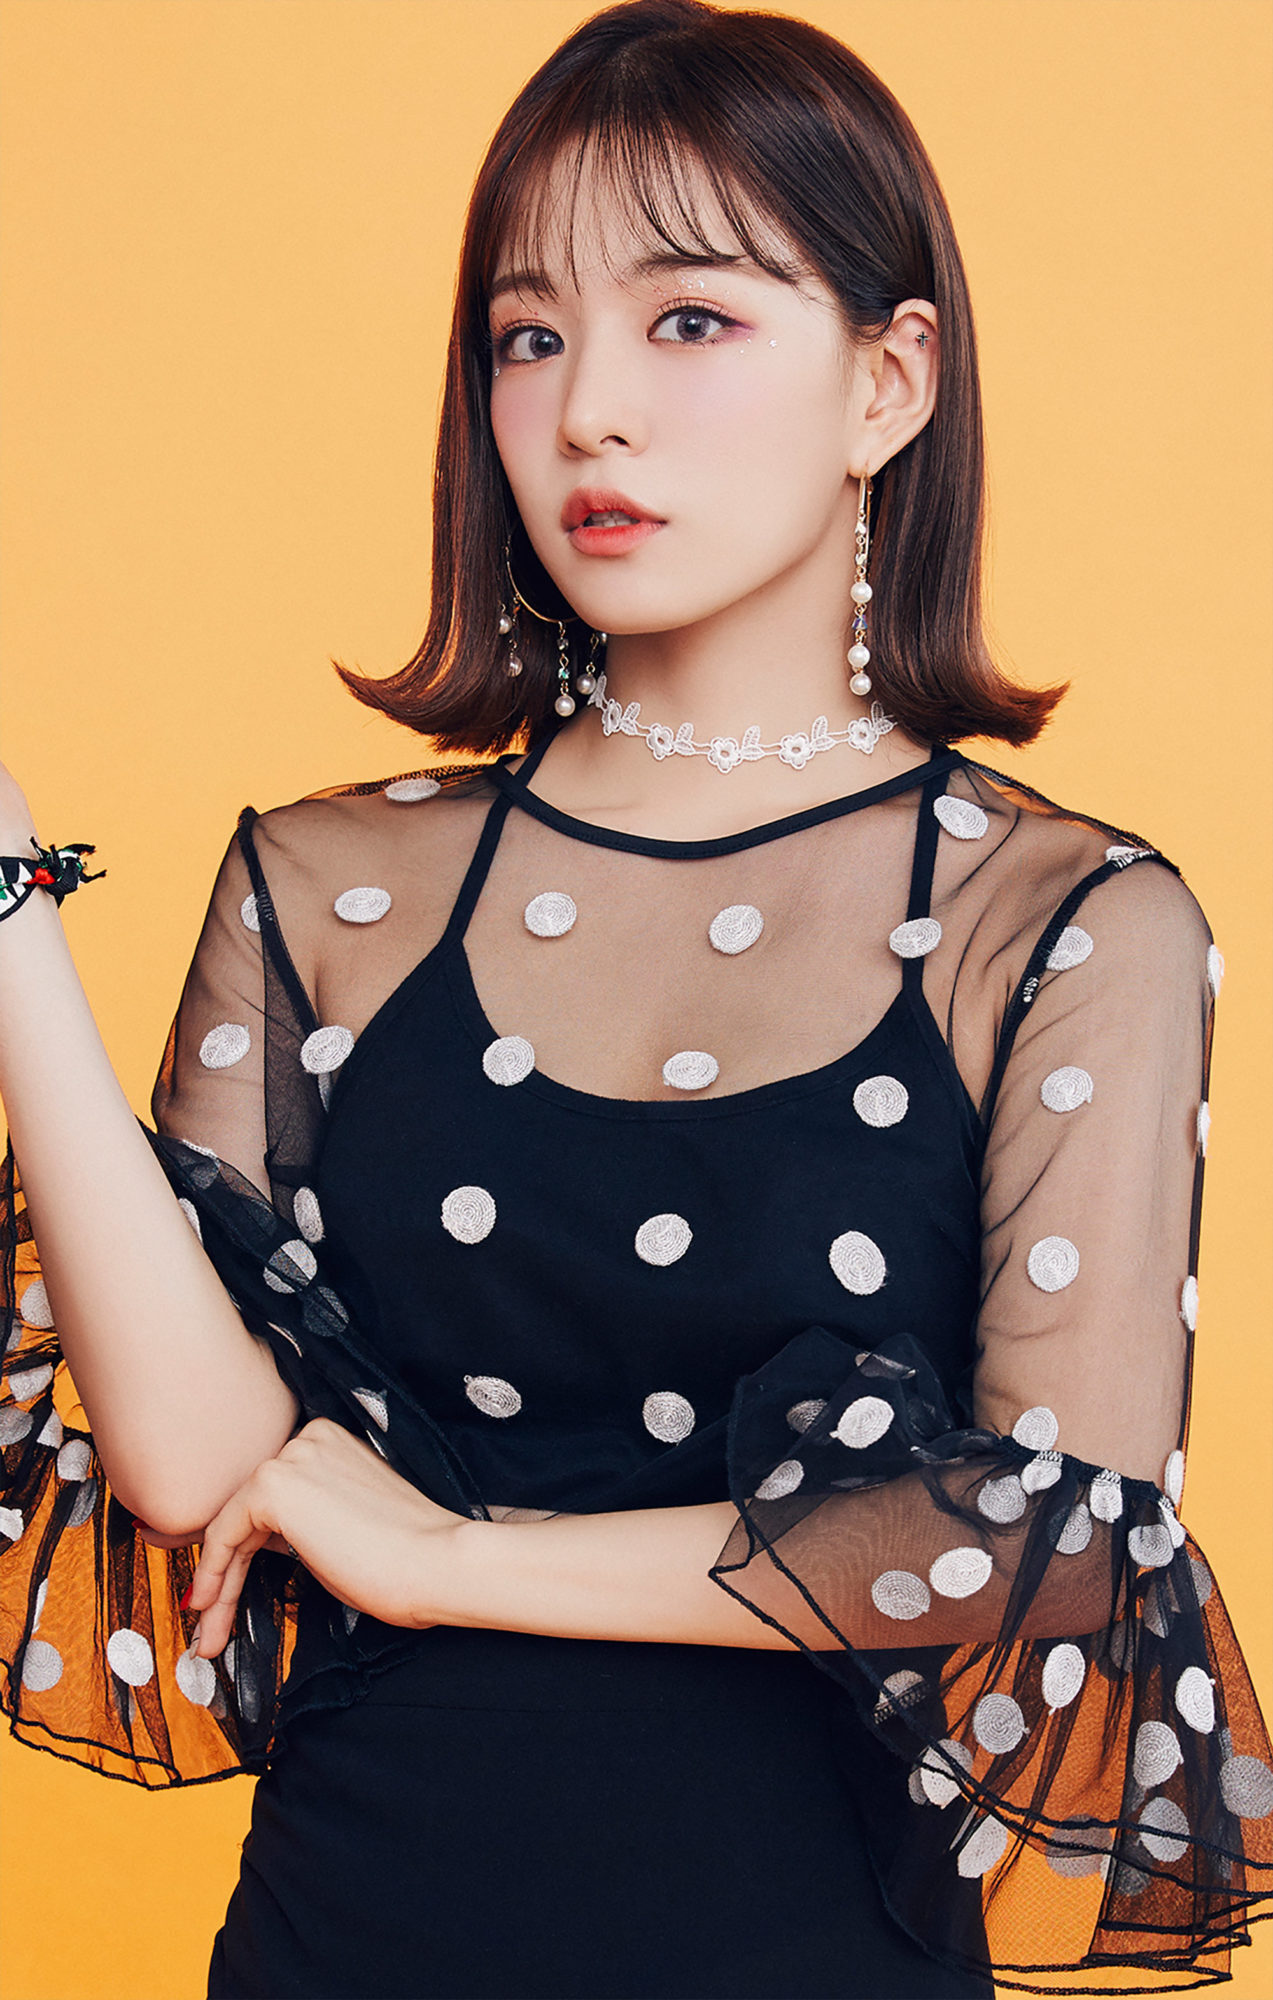 fromis_9 Lee Chaeyoung